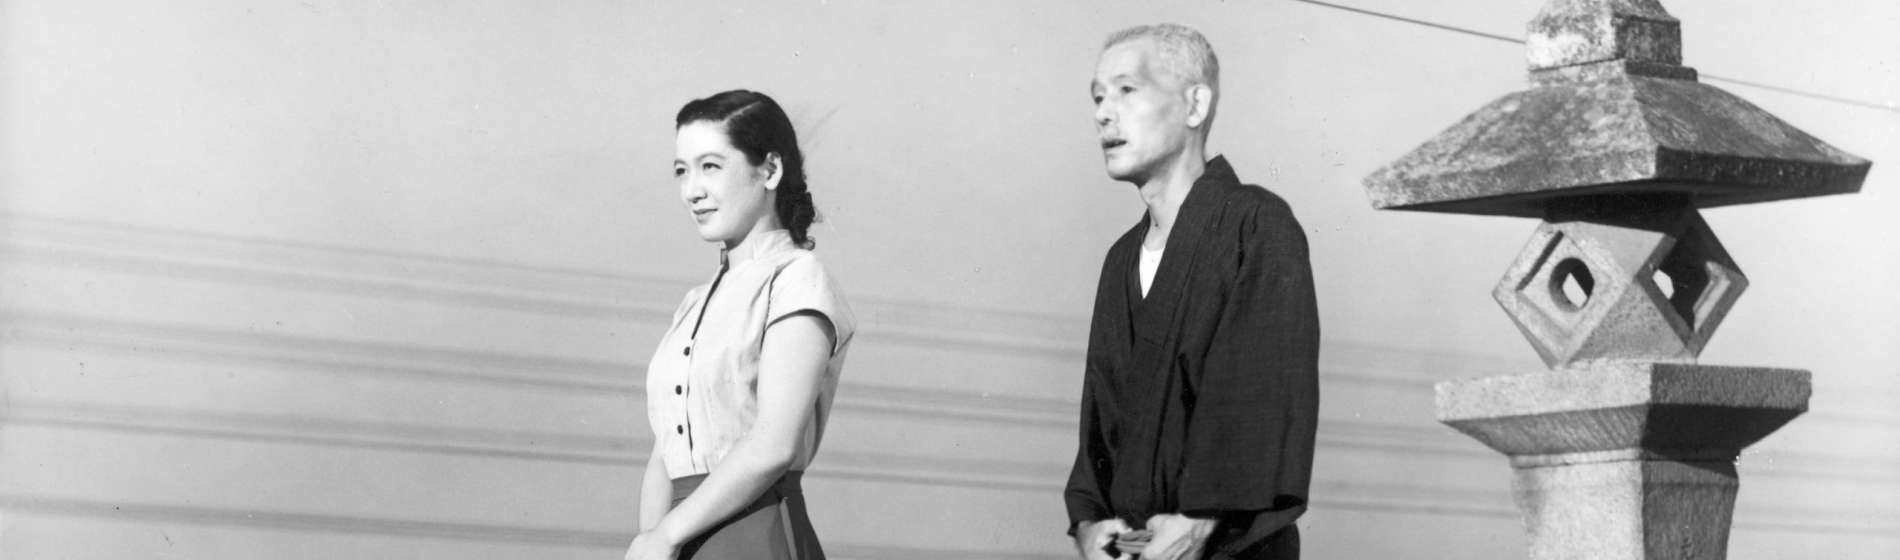 Tokyo story criterion collection